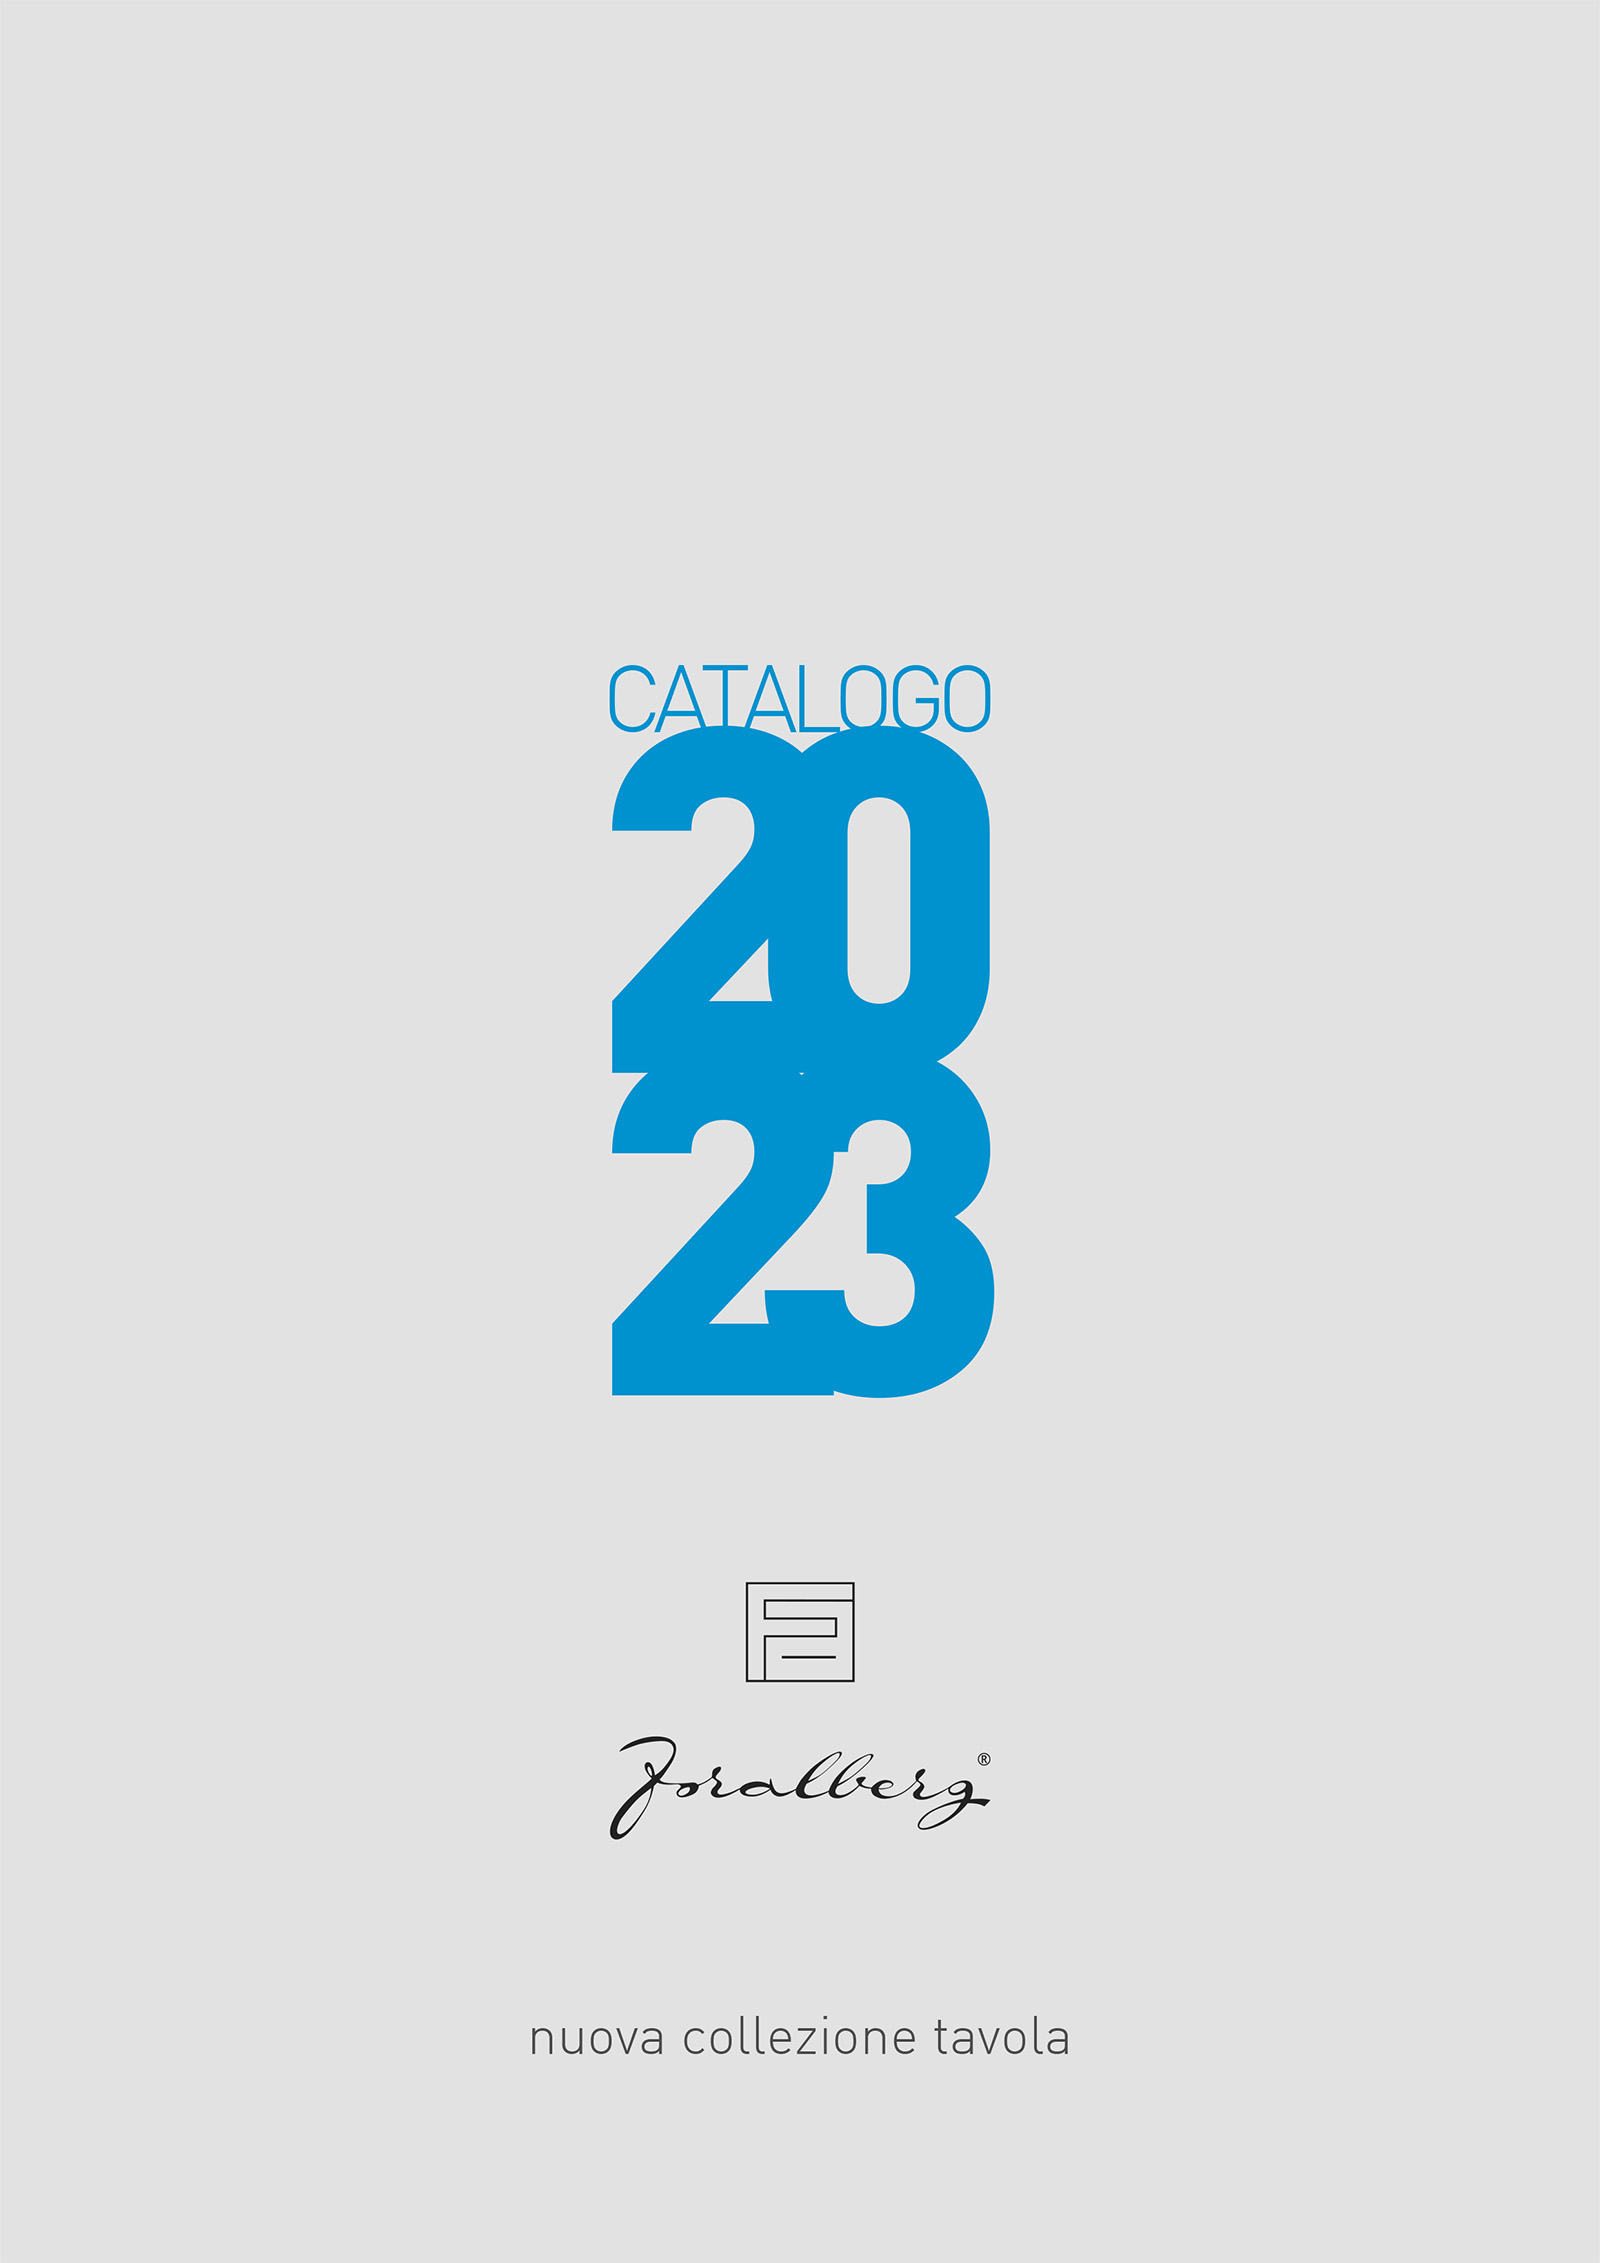 Catalog 2023, new table collection